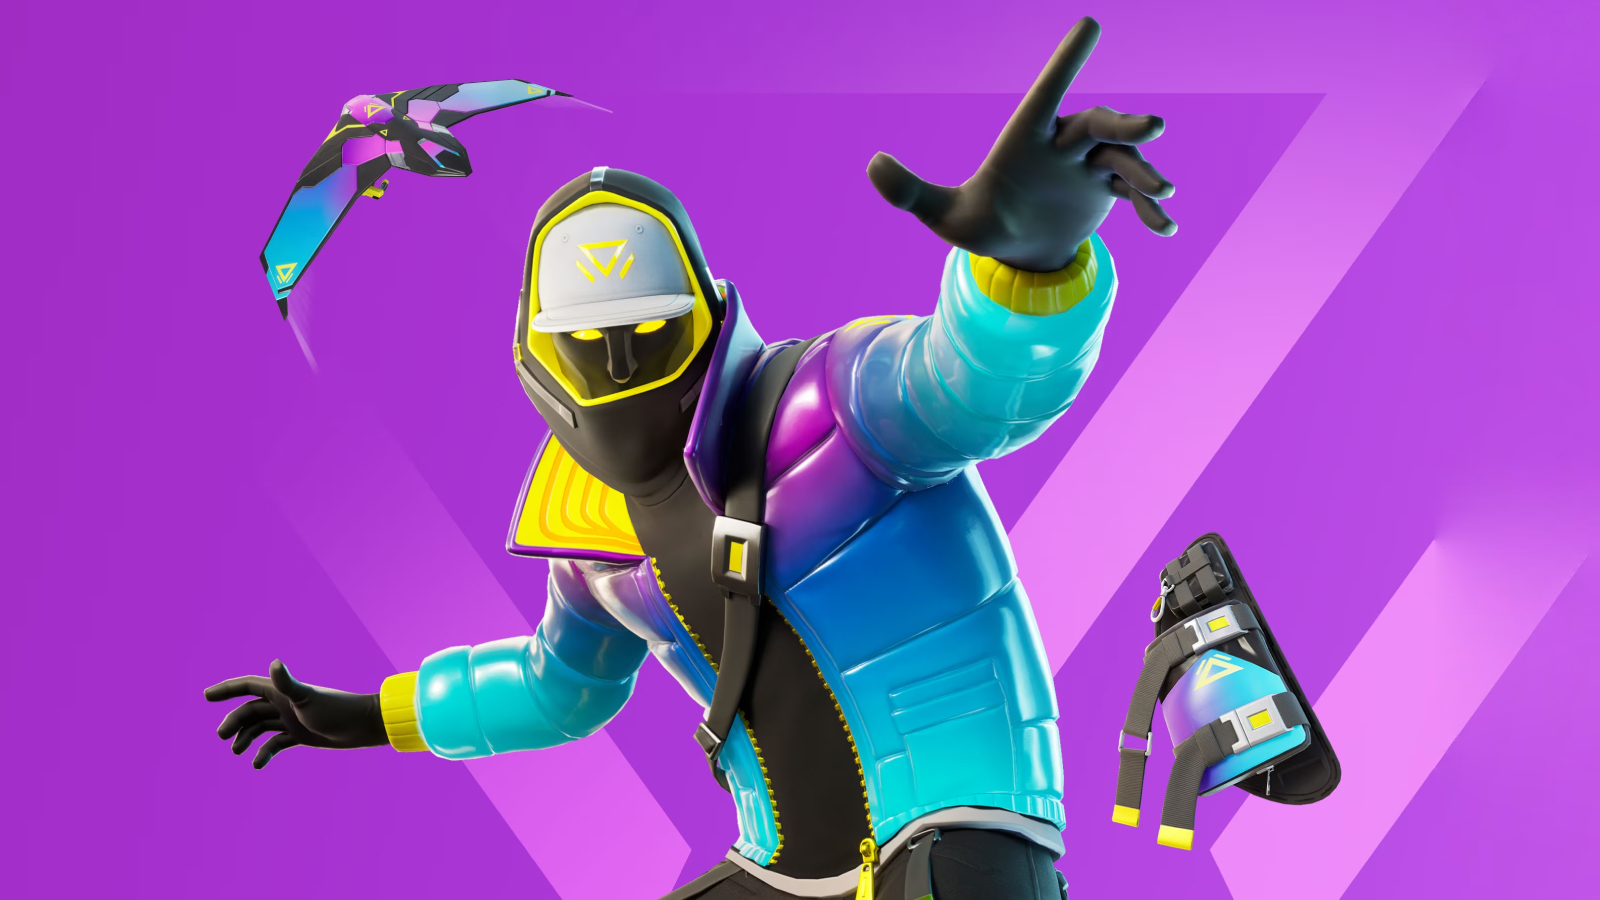 PlayStation Plus players can get a free skin, back bling, and